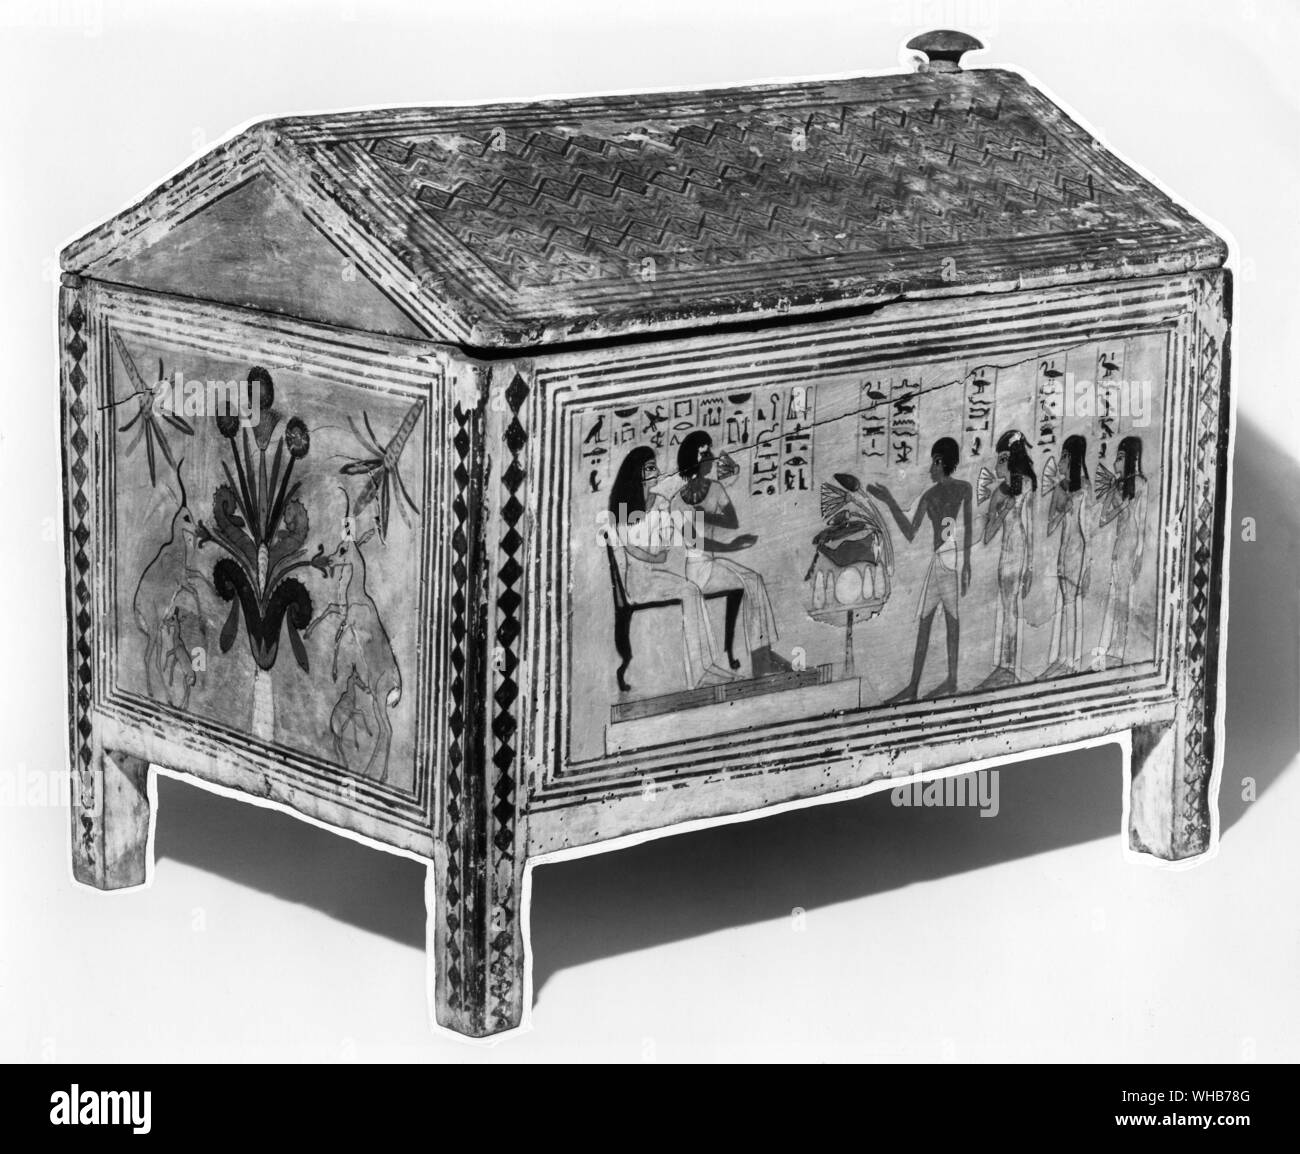 Propitiation of evil powers and spirits of the dead. . Among the powers who must be respected are the spirits of the dead because they can still affect the living for good or ill Porpa a royal official and his wife are shown in the after life receiving gifts of food from their living children. Egyptian wooden box 280BC Stock Photo